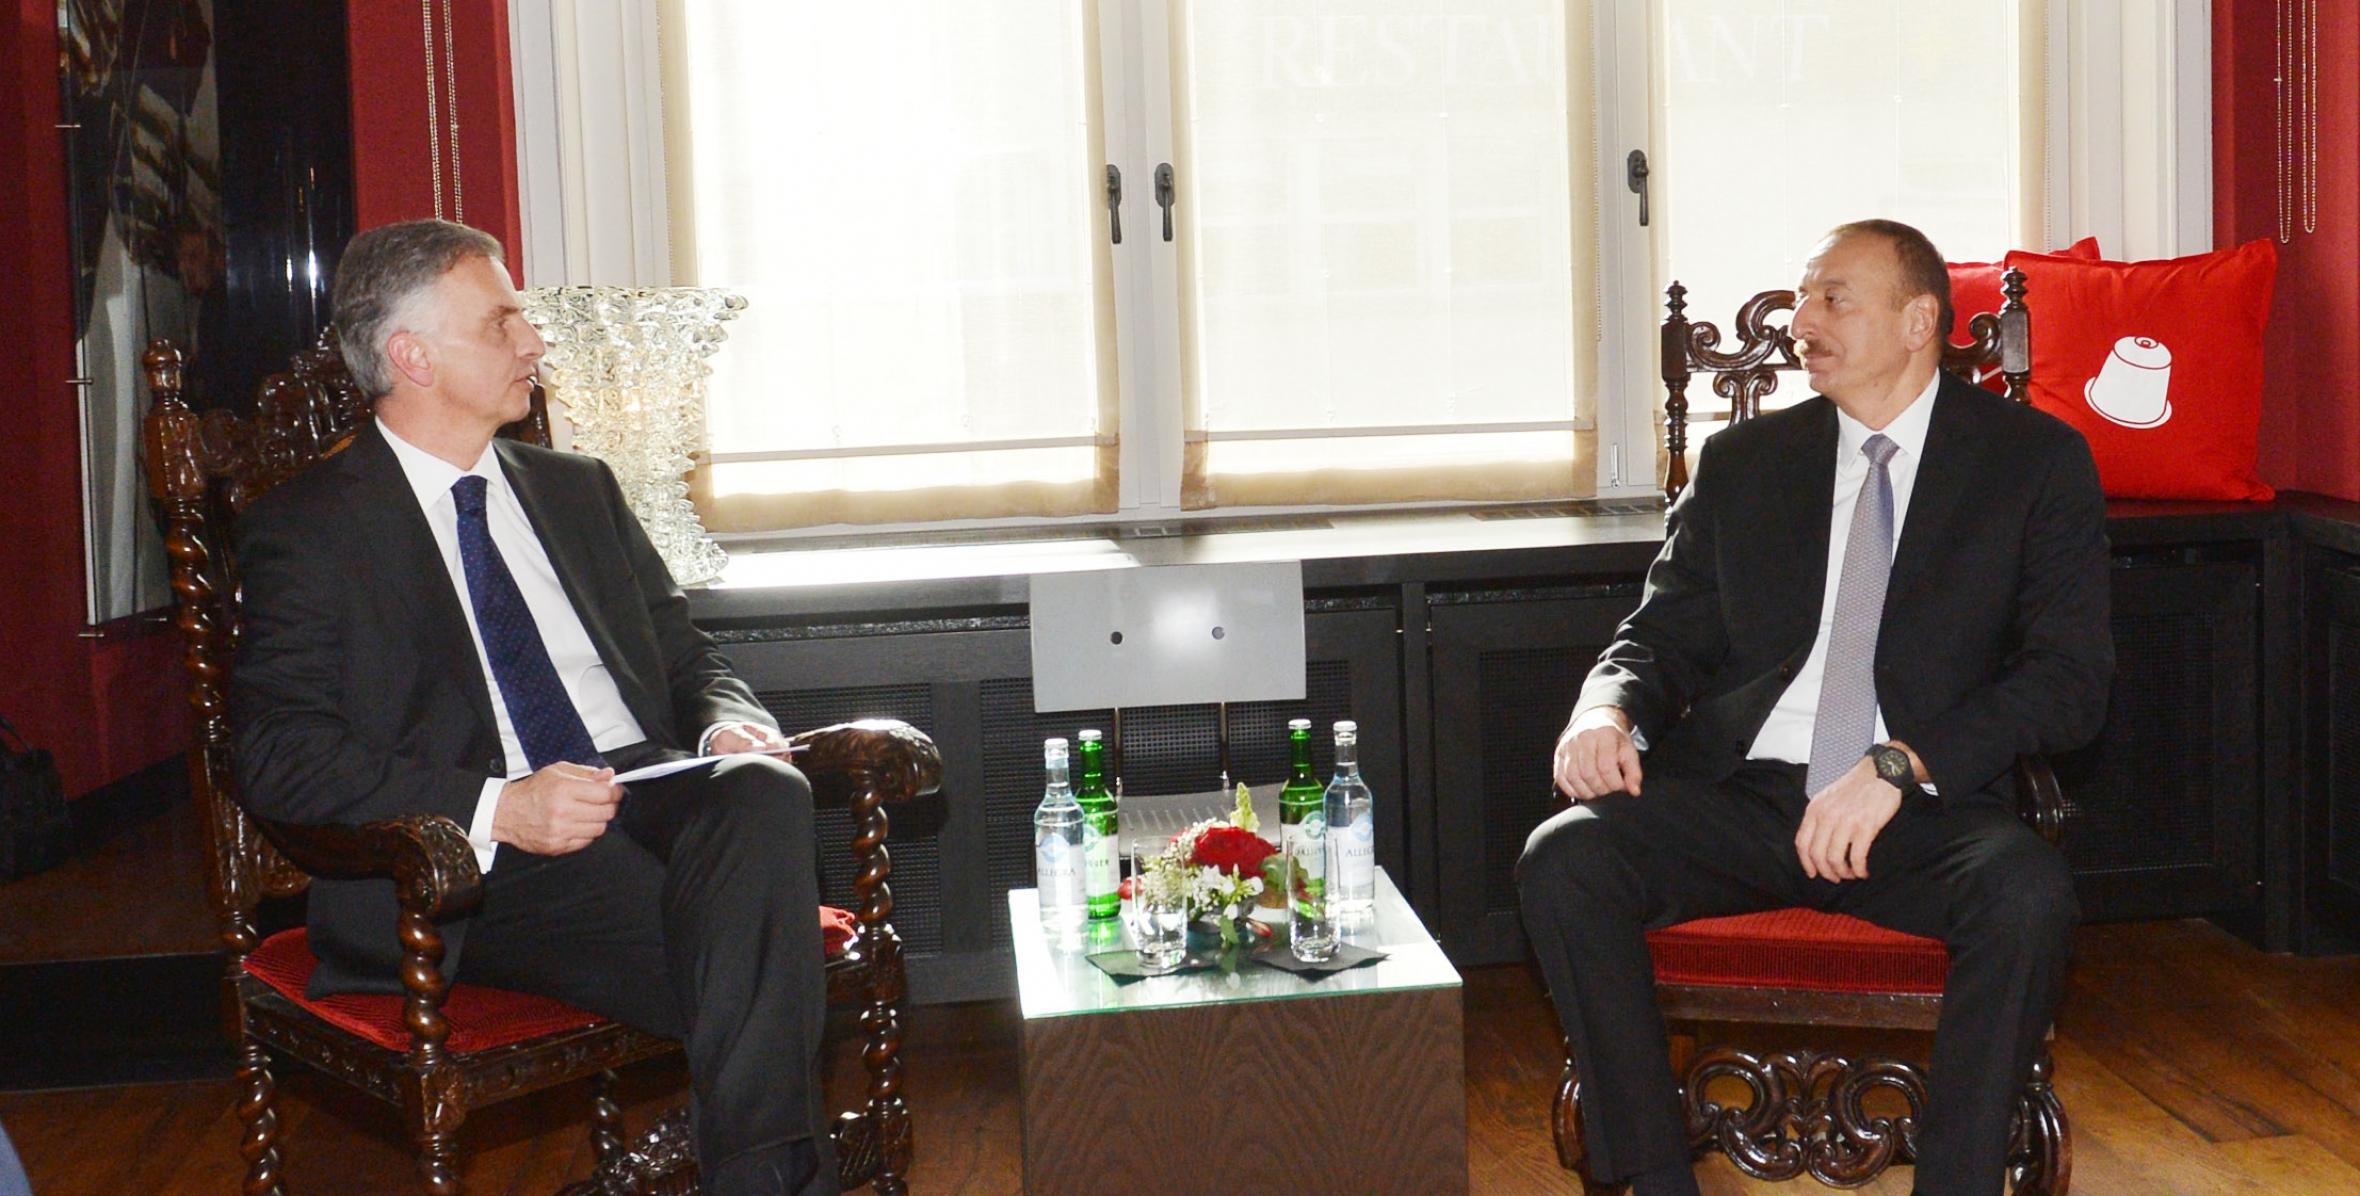 Ilham Aliyev met with President of the Swiss Confederation Didier Burkhalter in Davos